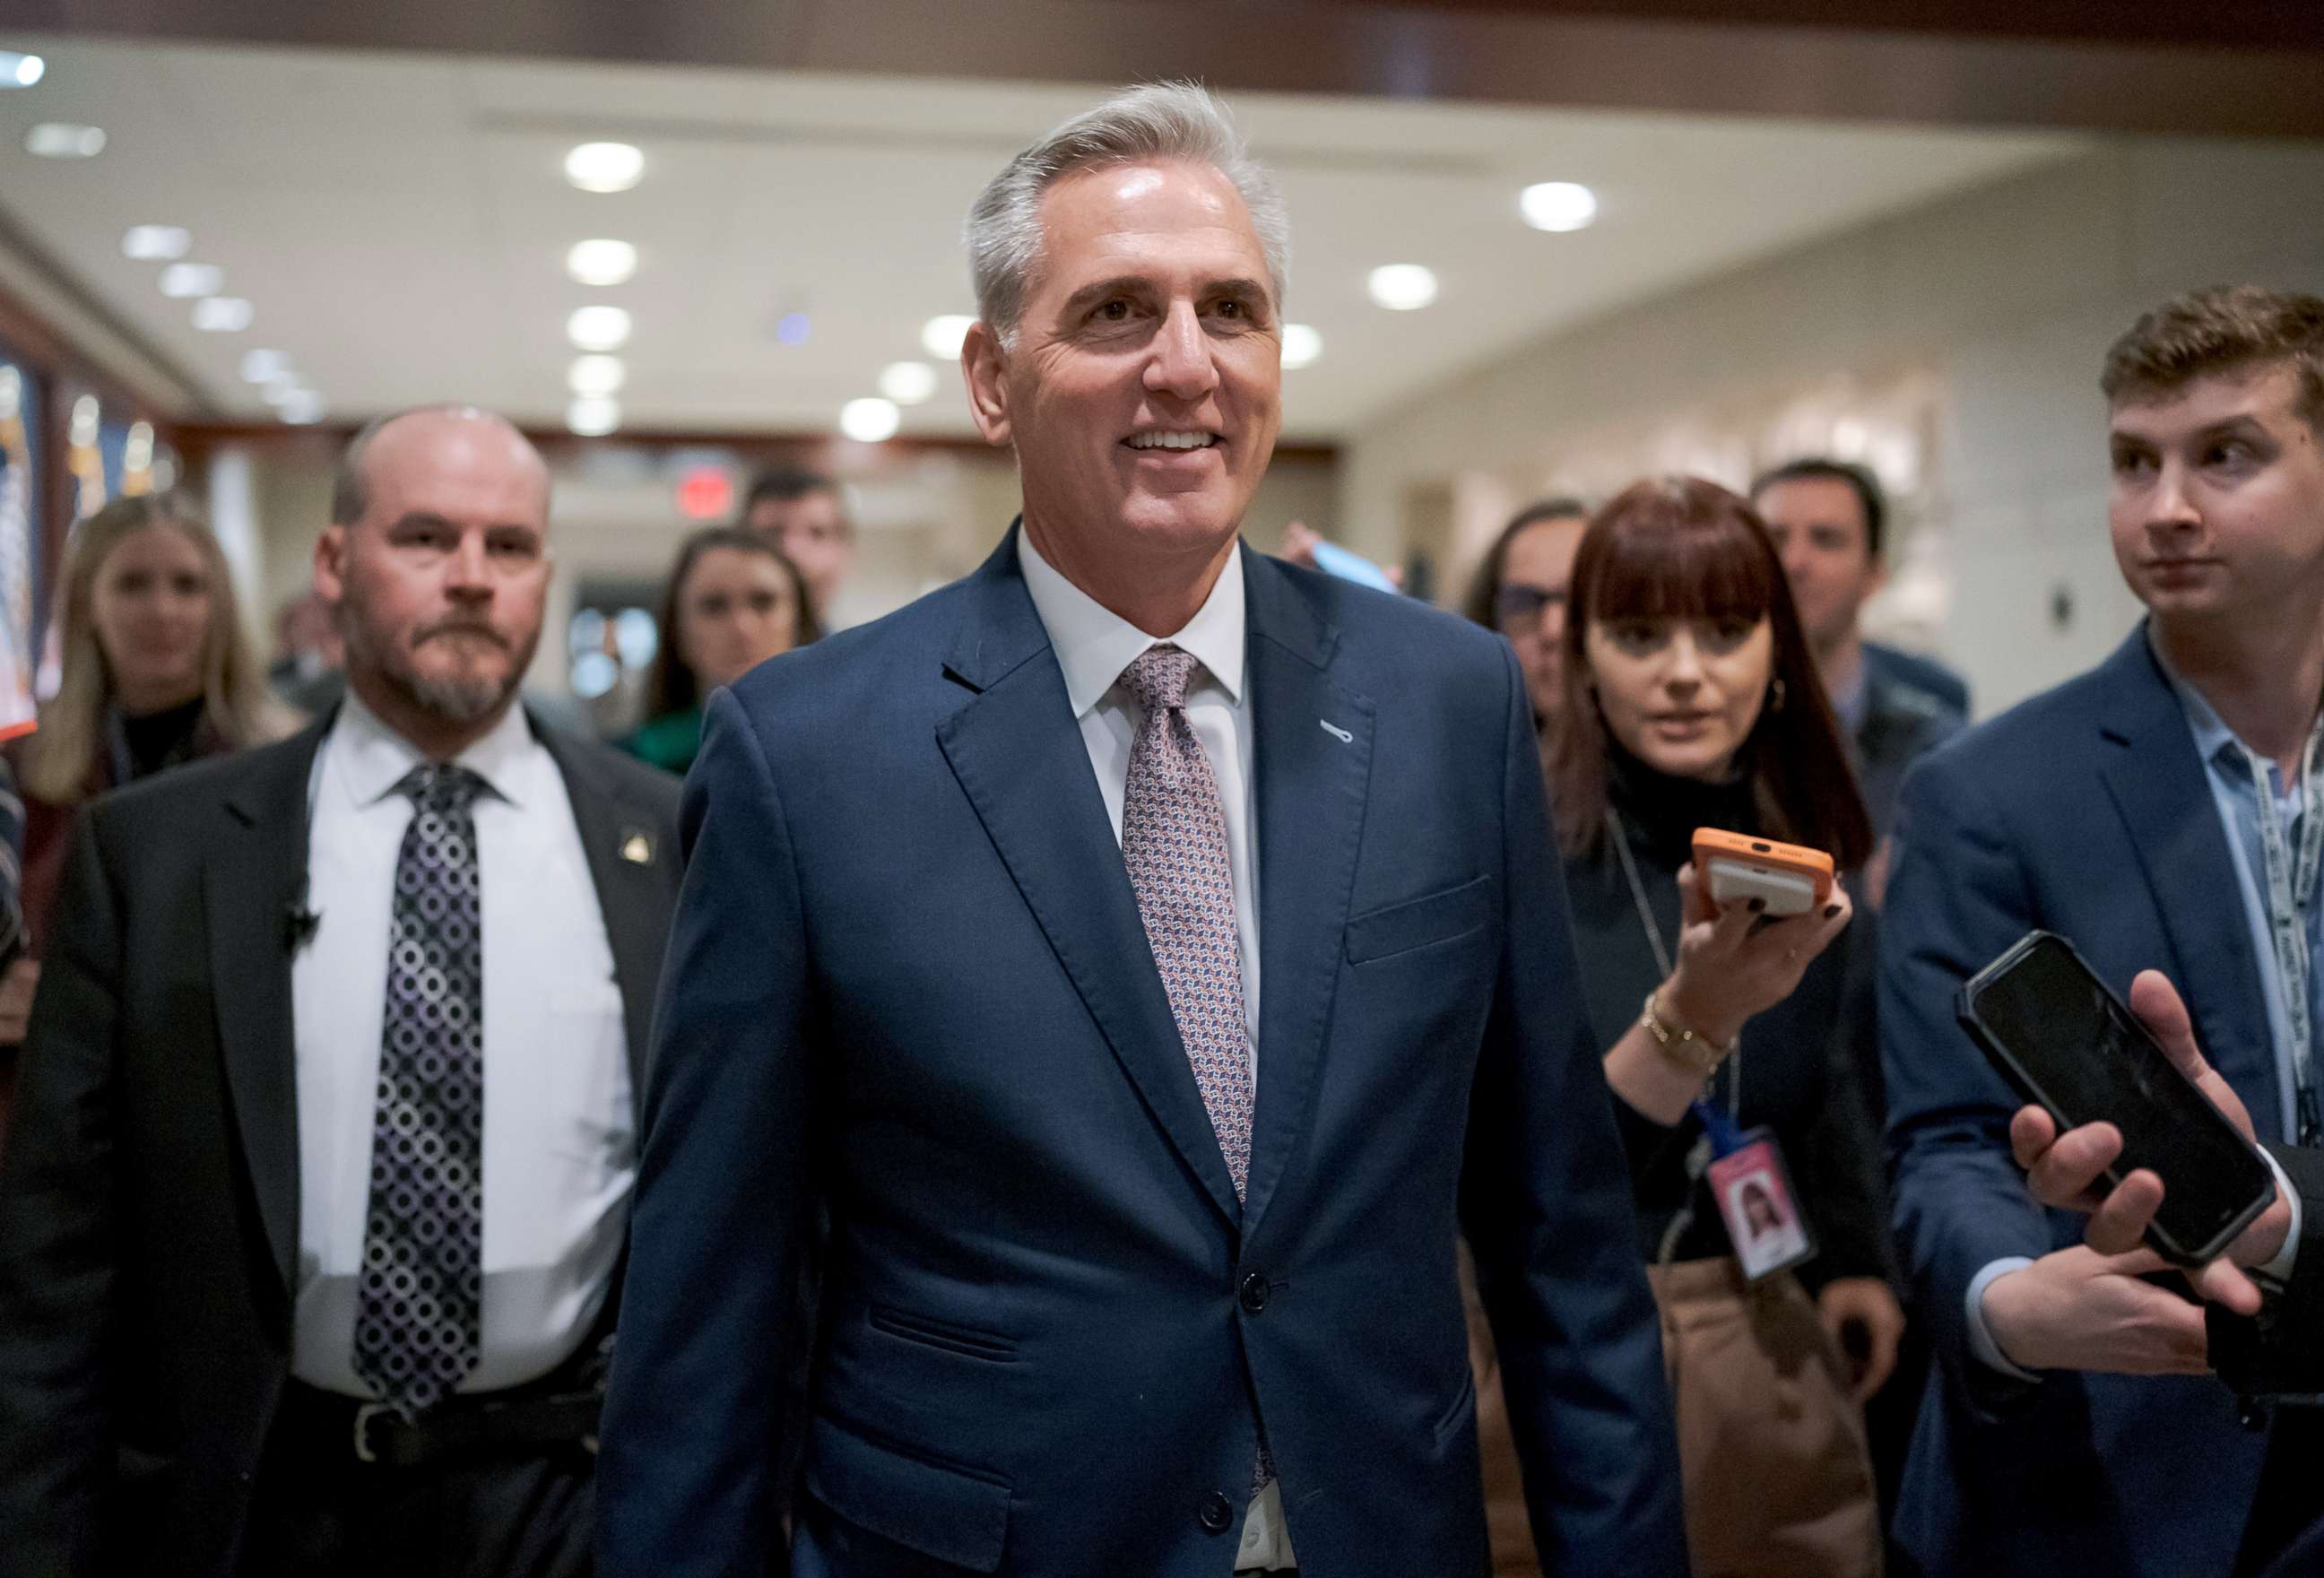 PHOTO: House Minority Leader Kevin McCarthy, R-Calif., arrives to meet behind closed doors as Republicans hold their leadership candidate forum at the Capitol in Washington, Nov. 14, 2022.